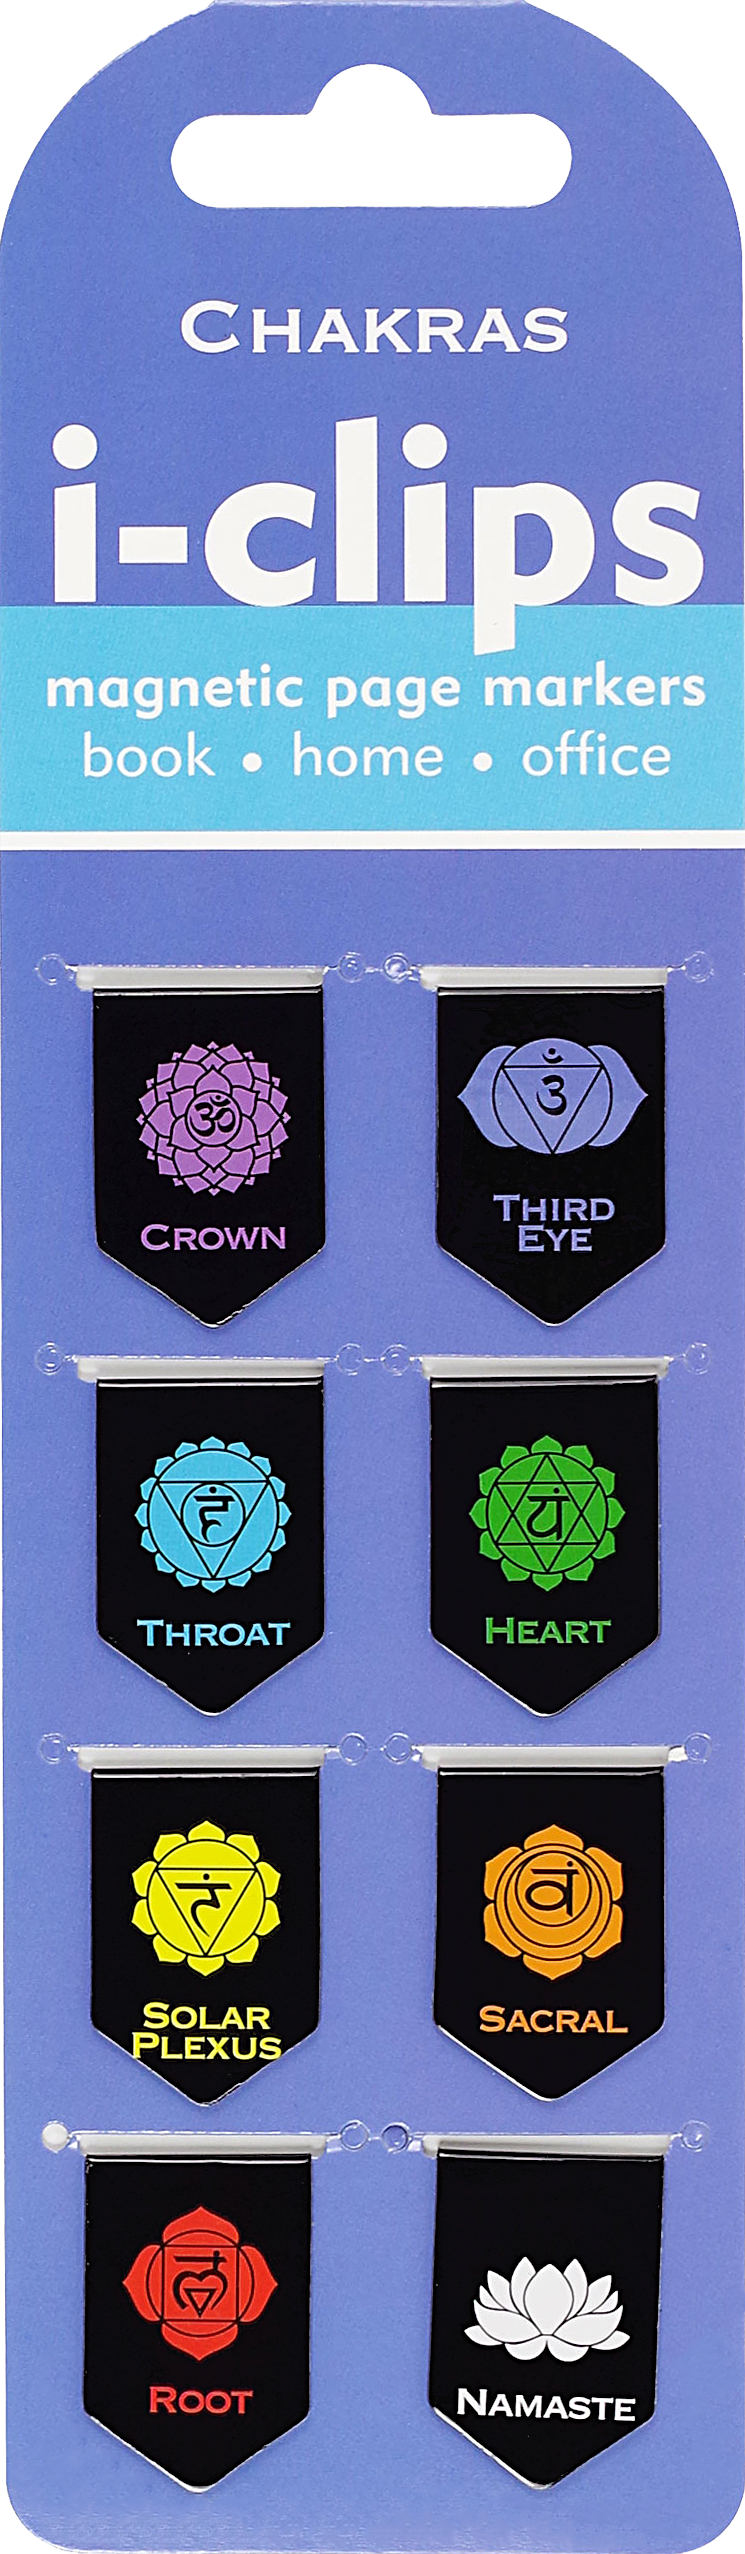 Chakras i-clips Magnetic Page Markers